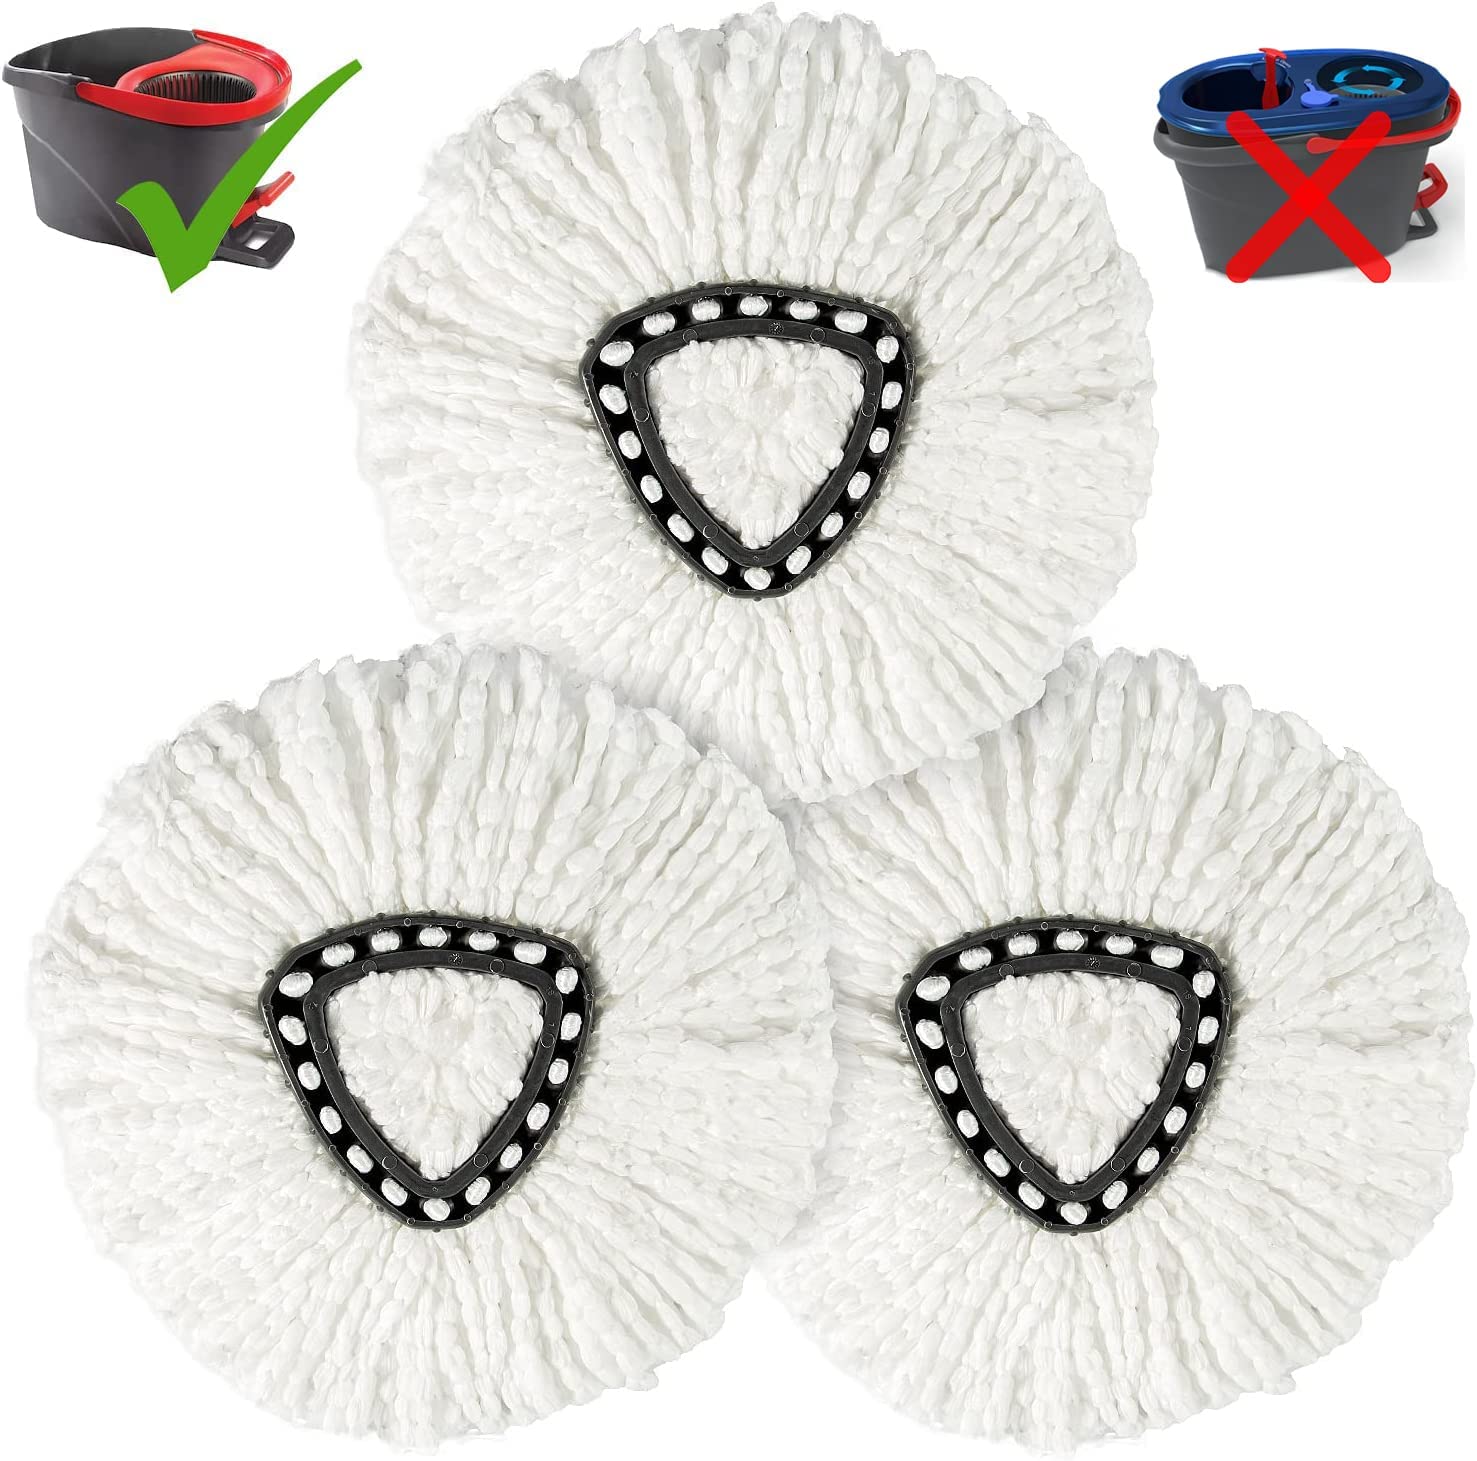 Mop Replace Heads For O-Cedar Spin Mop 2-Tank System, 4.33 Inches Core Spin  Mop Refill For O Cedar Replacements Heads, Easy to Replace, Microfiber